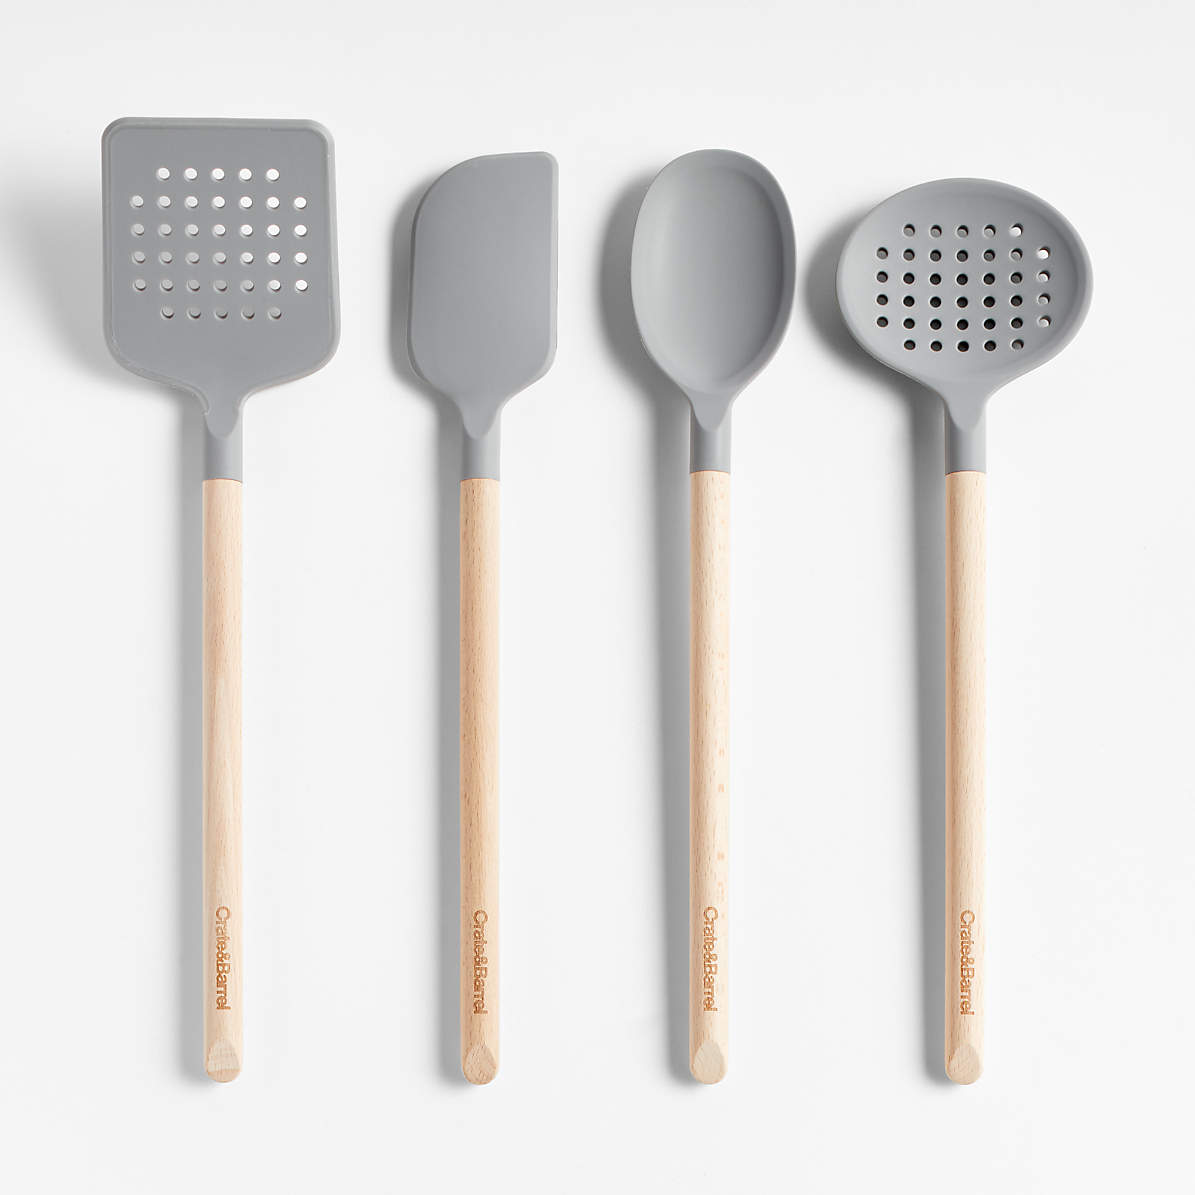 Crate and Barrel Silicone & Wood Spatula - Yellow